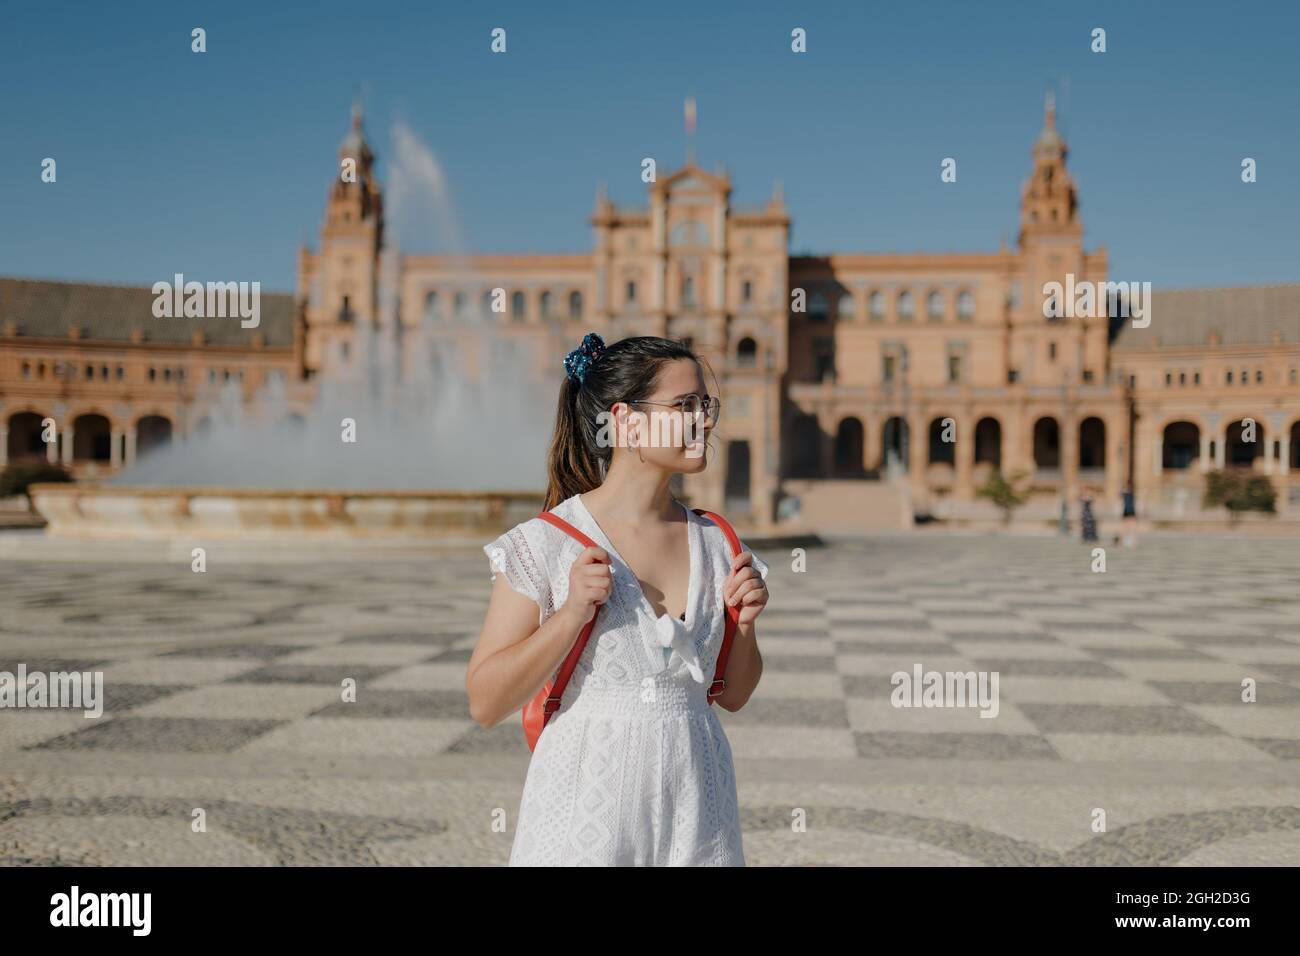 Young tourist woman with glasses wearing a white dress and red backpack is looking away and smiling while standing in the Plaza de España of Seville. Stock Photo